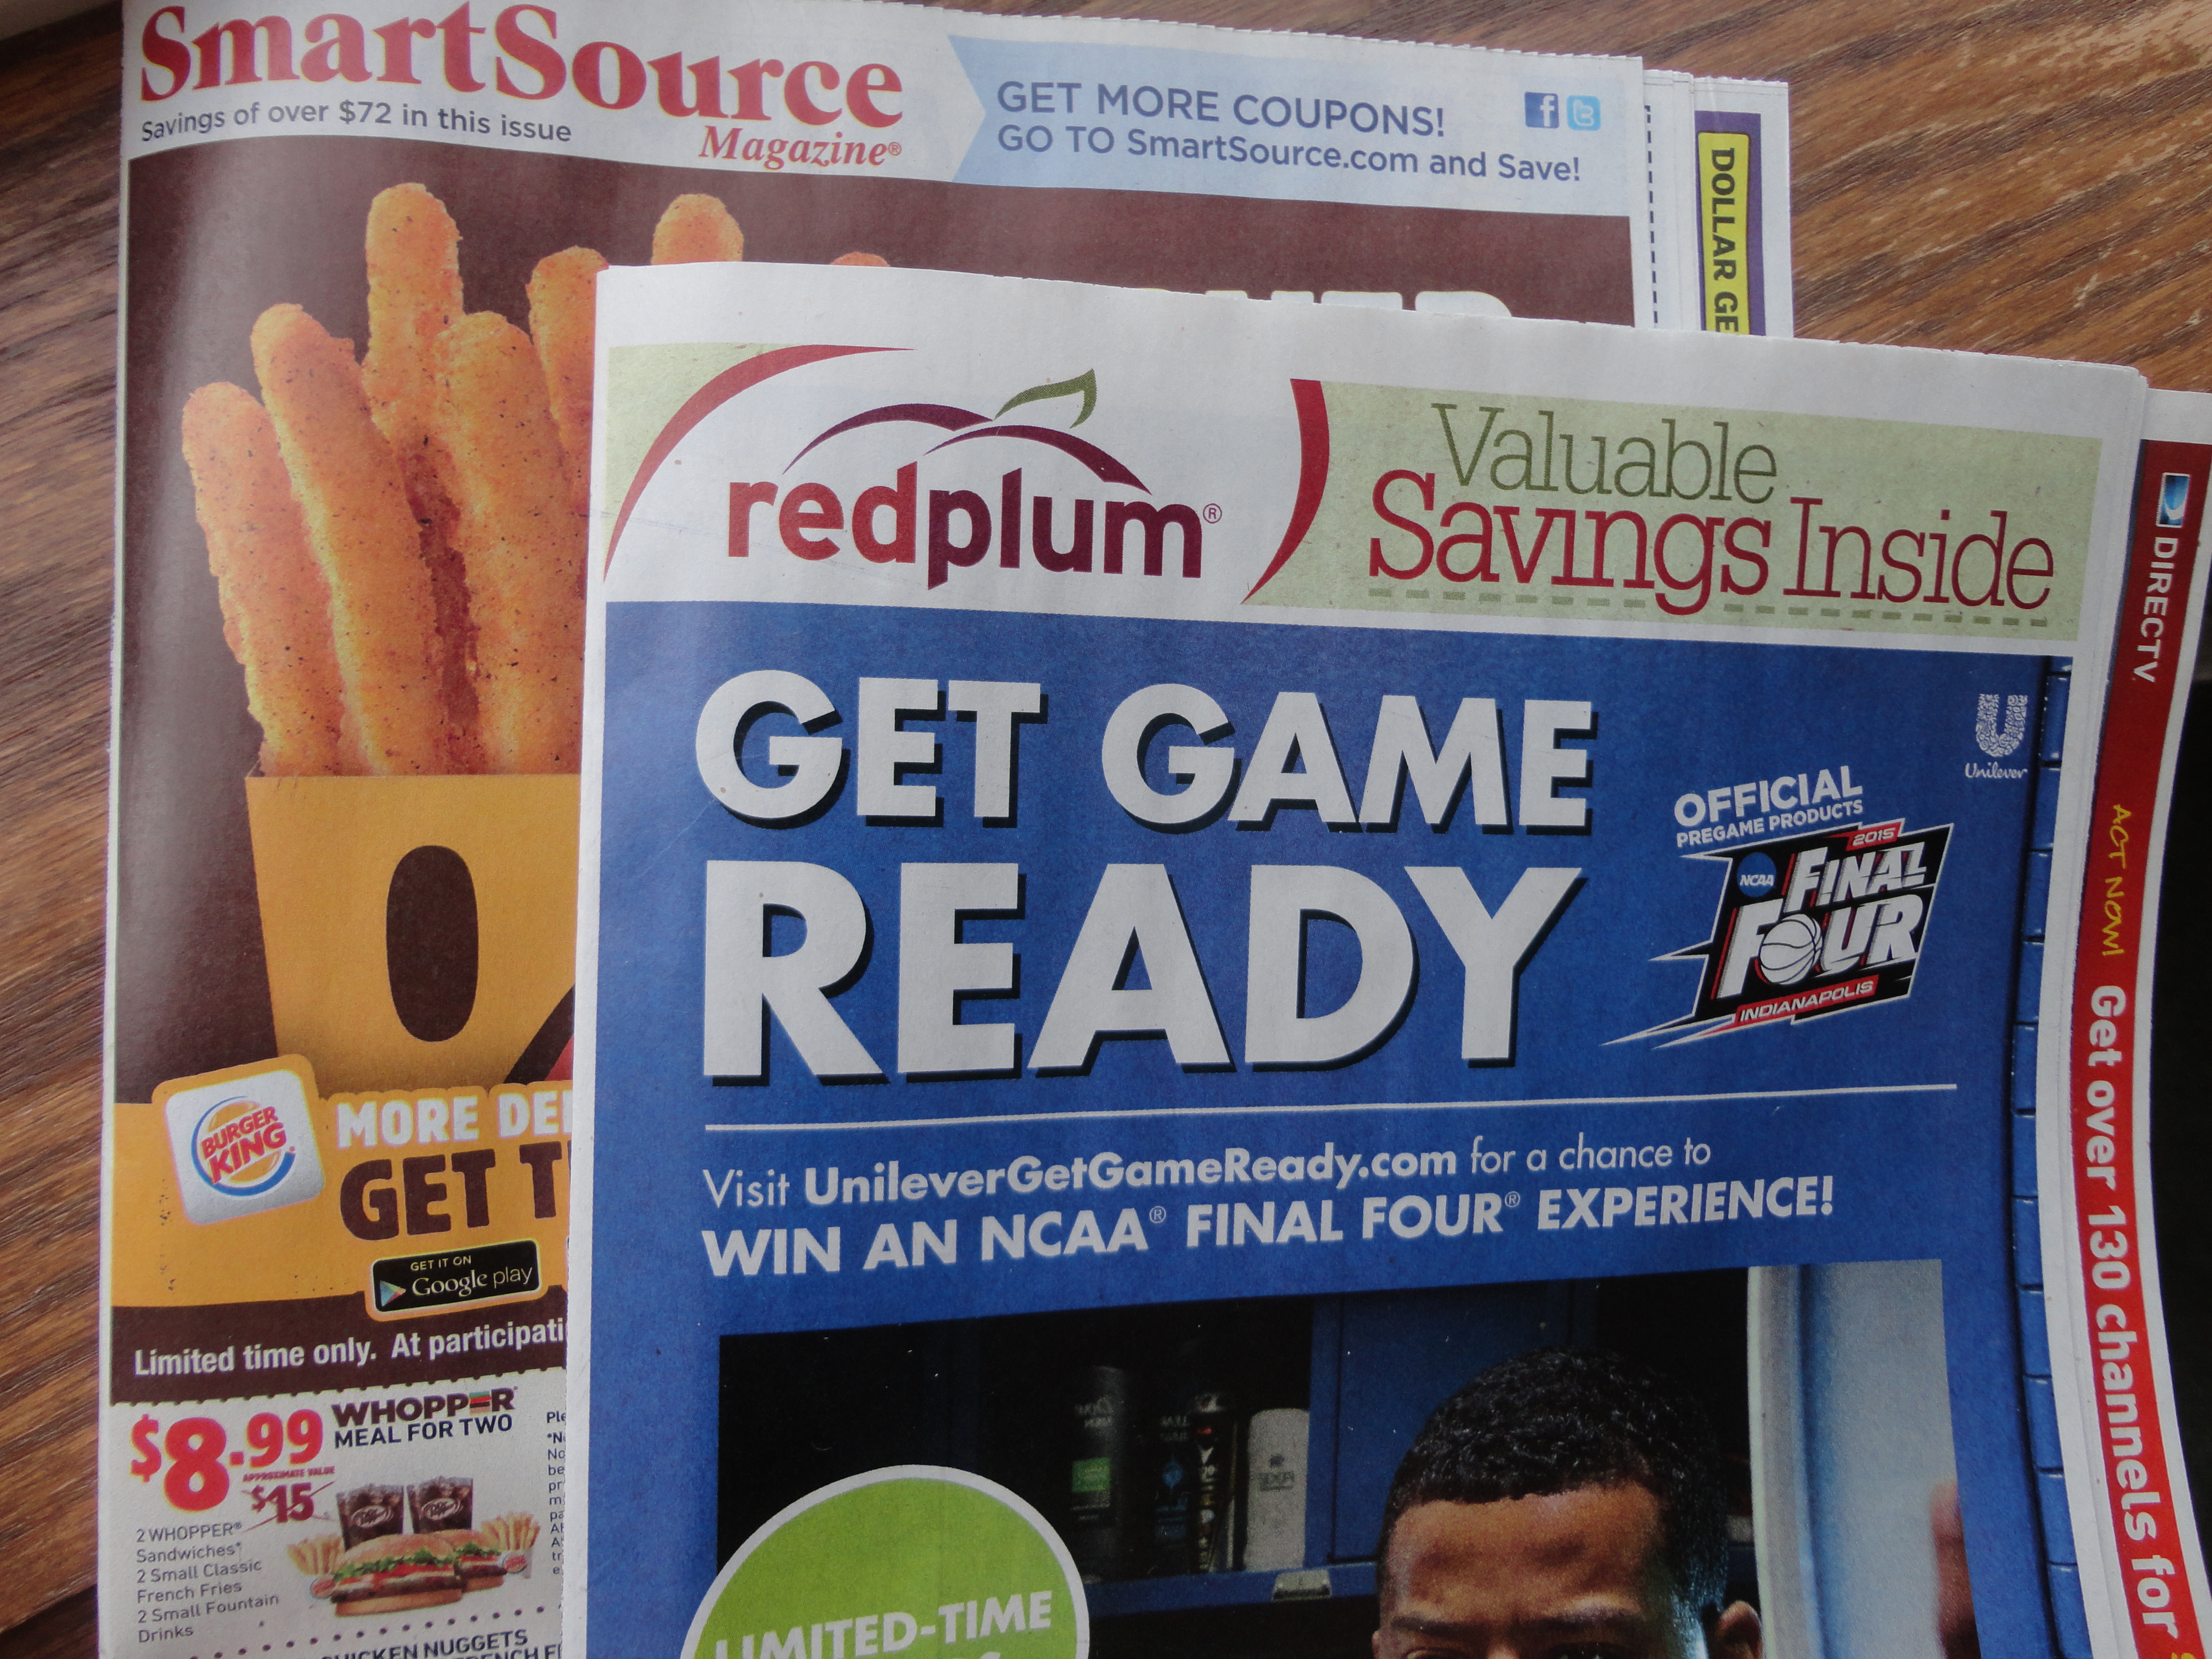 Public Opinion (3/22/15) 2 Coupon Inserts, 10 off 30 Board Games In